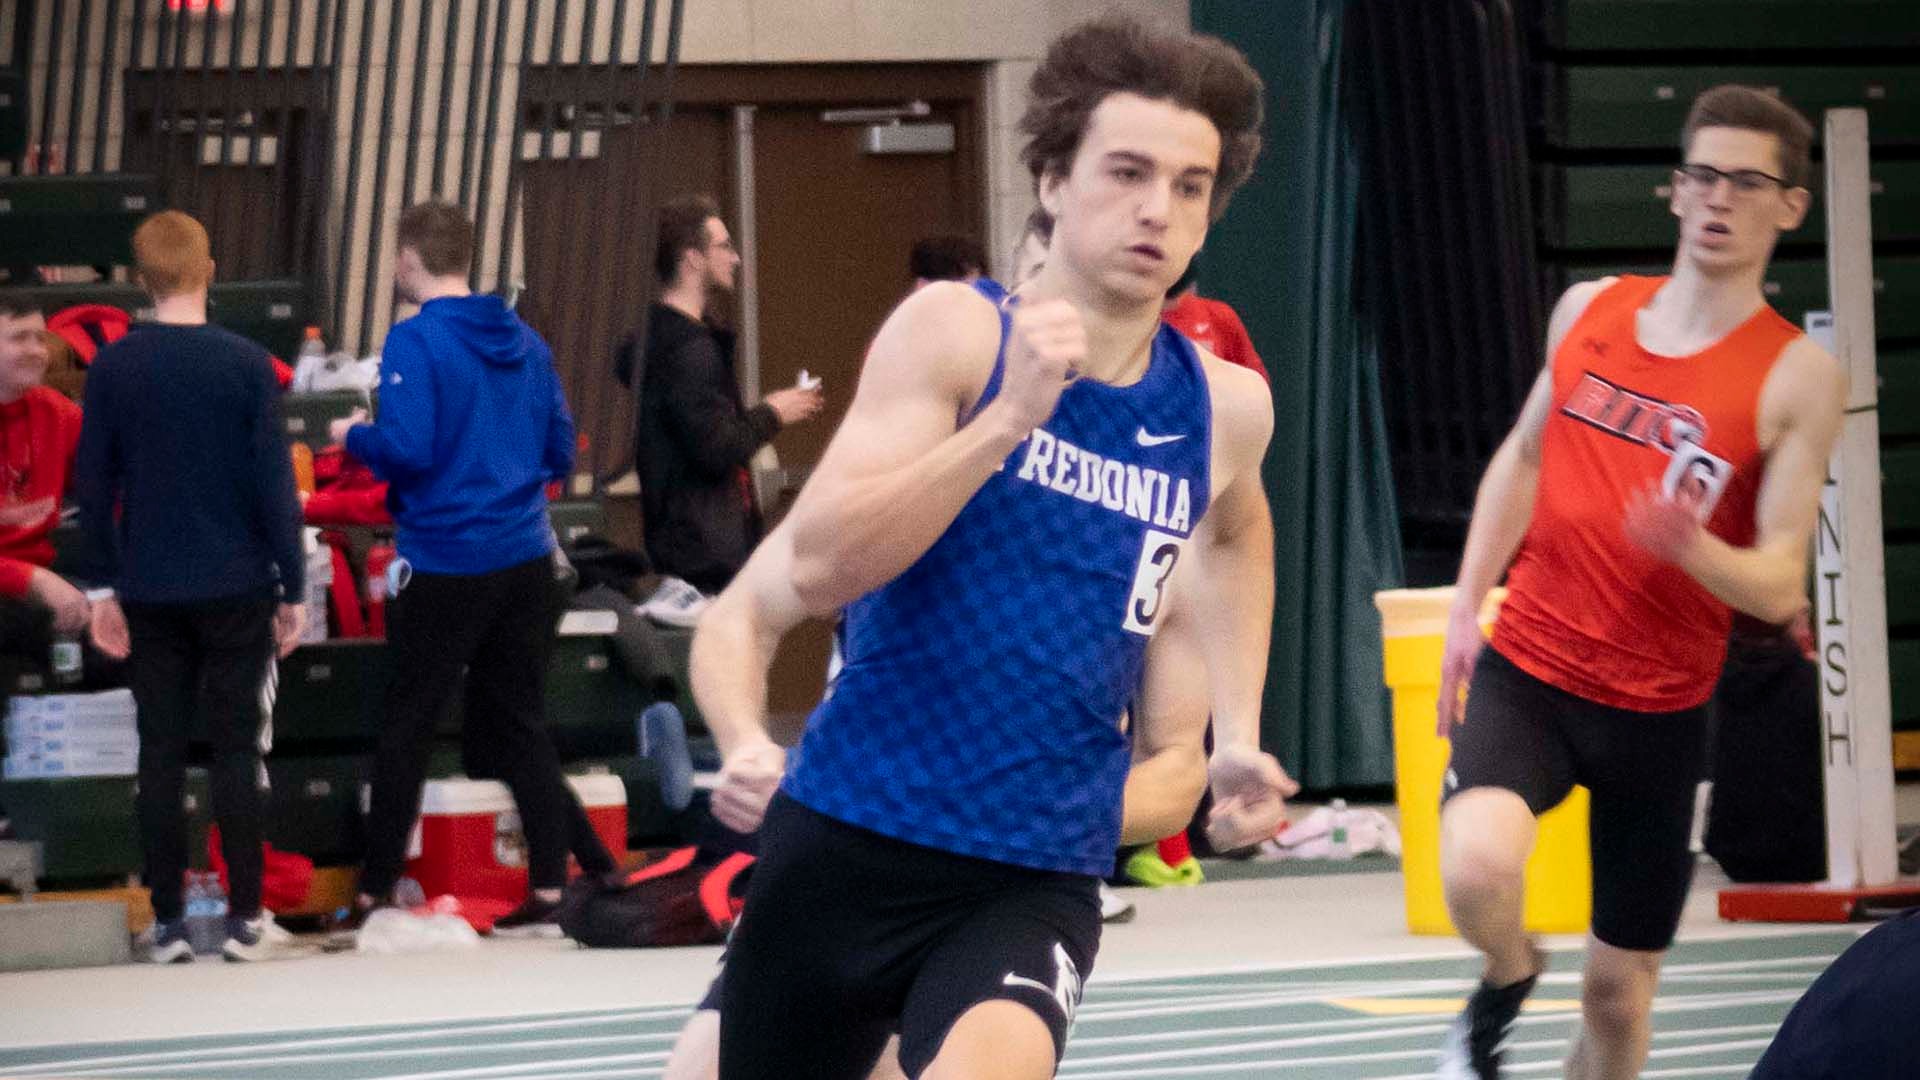 Fredonia's Nick Abdo selected Men’s Indoor Track Athlete of the Week